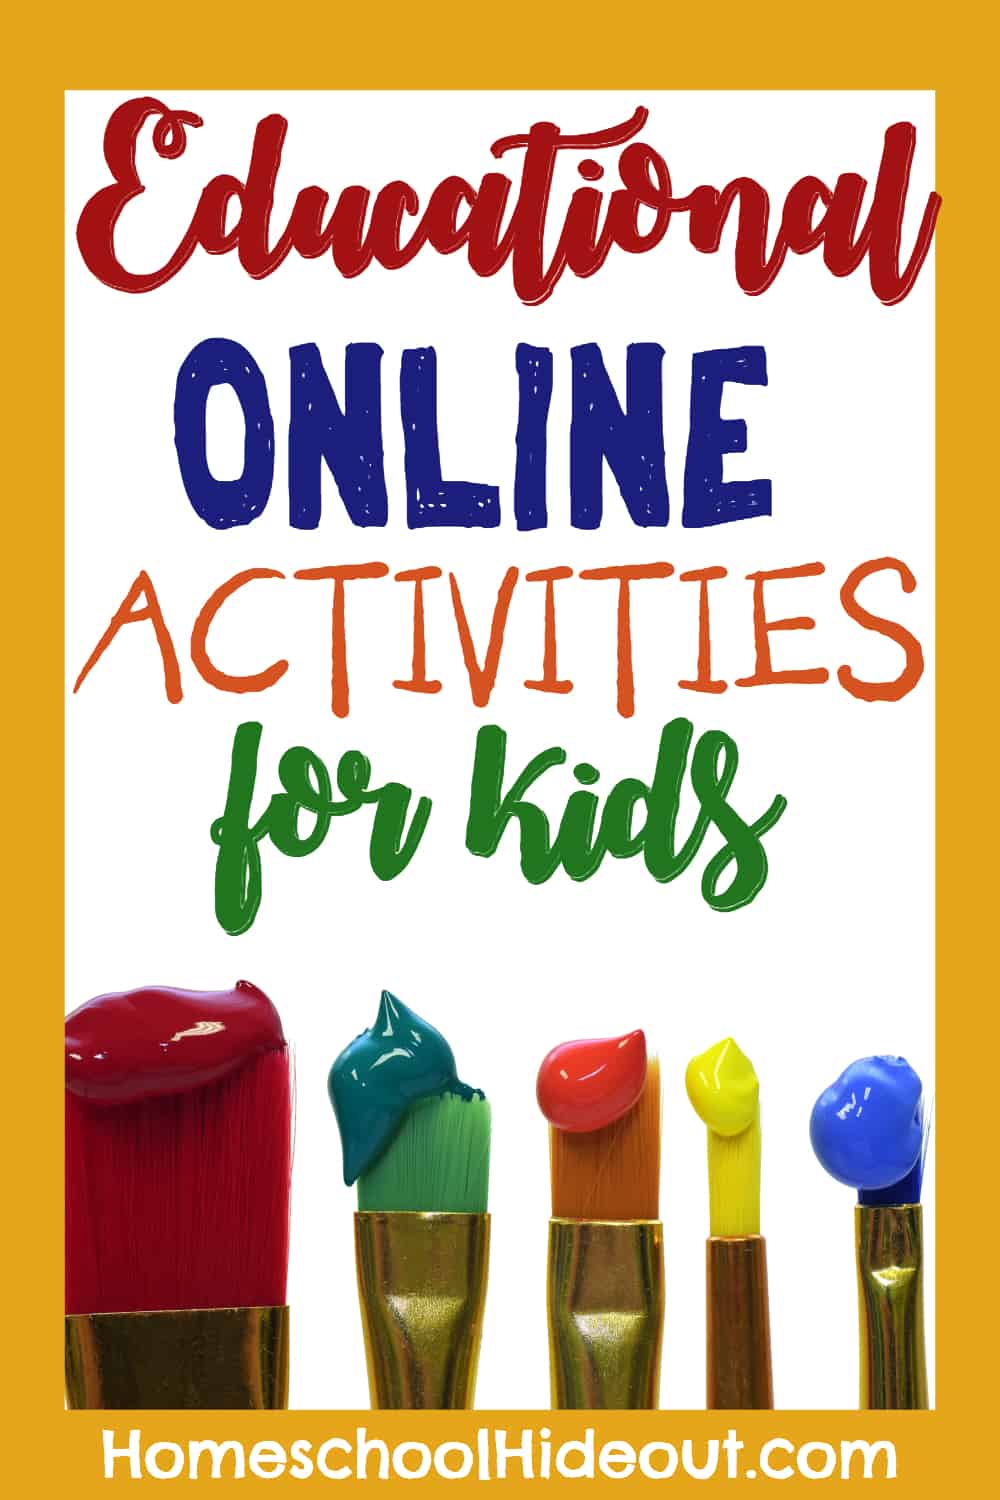 Great ideas for educational online activities to do inside! Perfect for snow days.